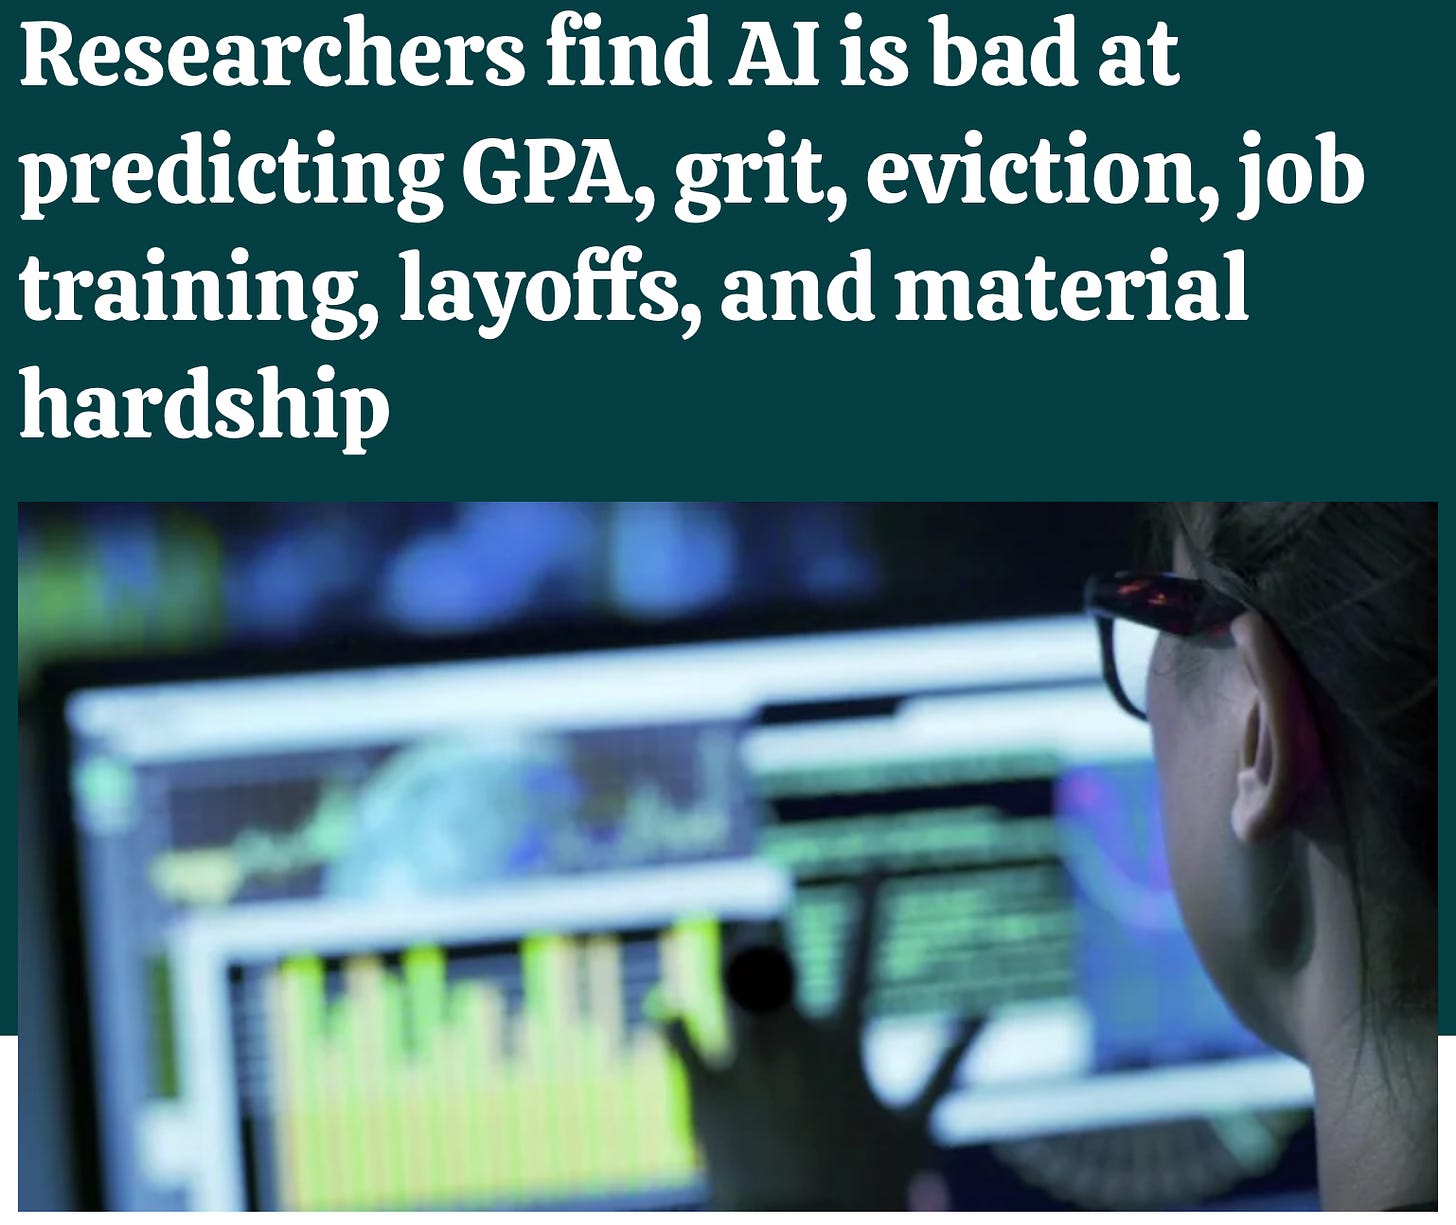 A screenshot from a news article which says: "Researchers find AI is bad at predicting GPA, grit, eviction, job training, layoffs, and material hardship".